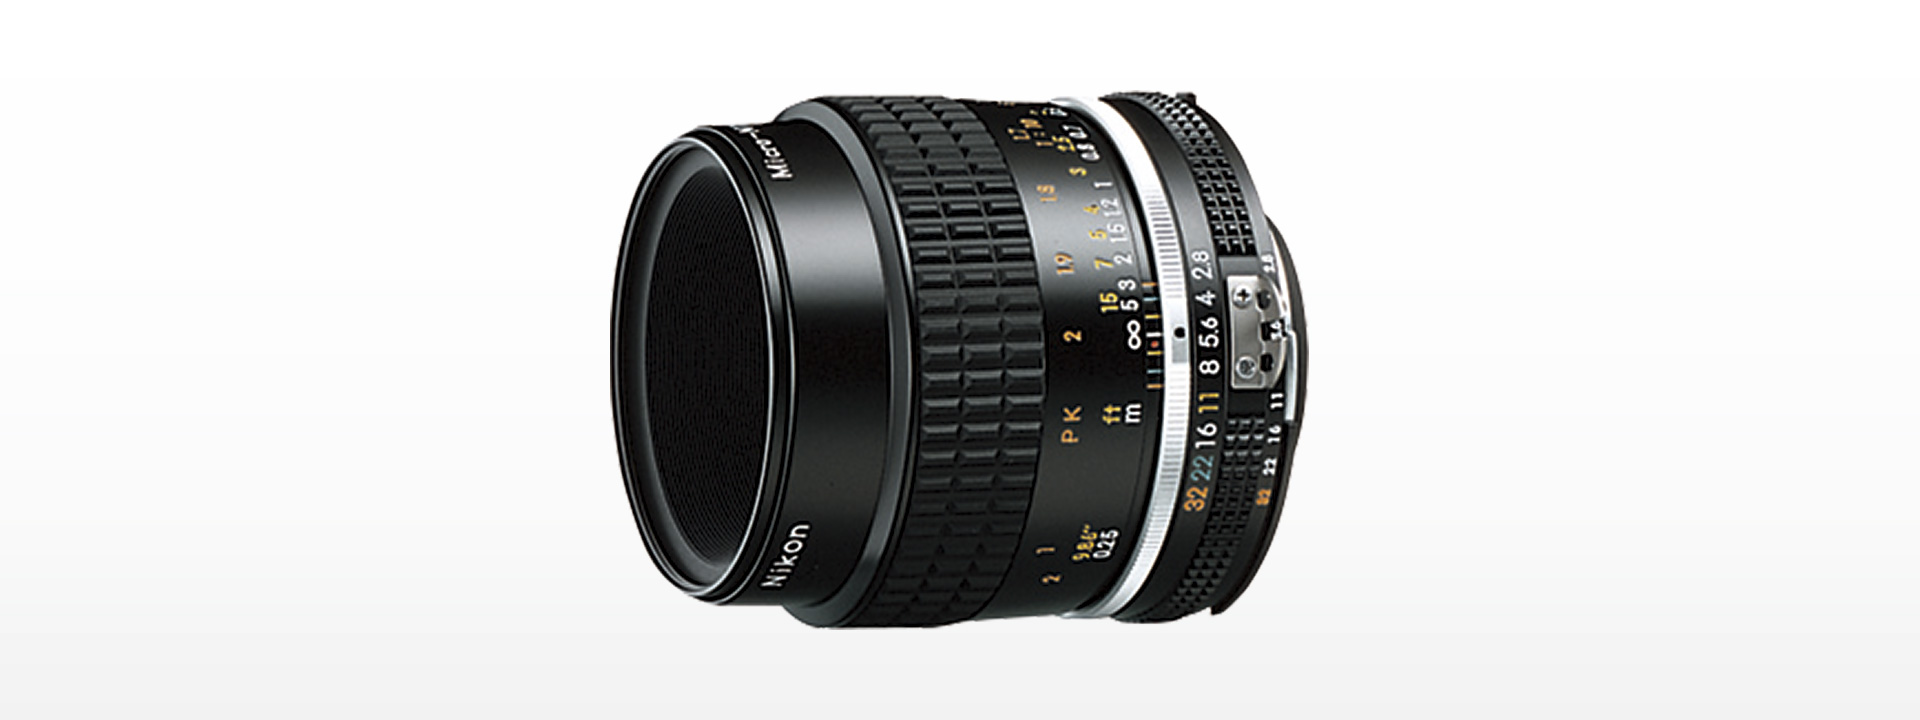 AI Micro-Nikkor 55mm f/2.8S - 概要 | NIKKORレンズ | ニコンイメージング